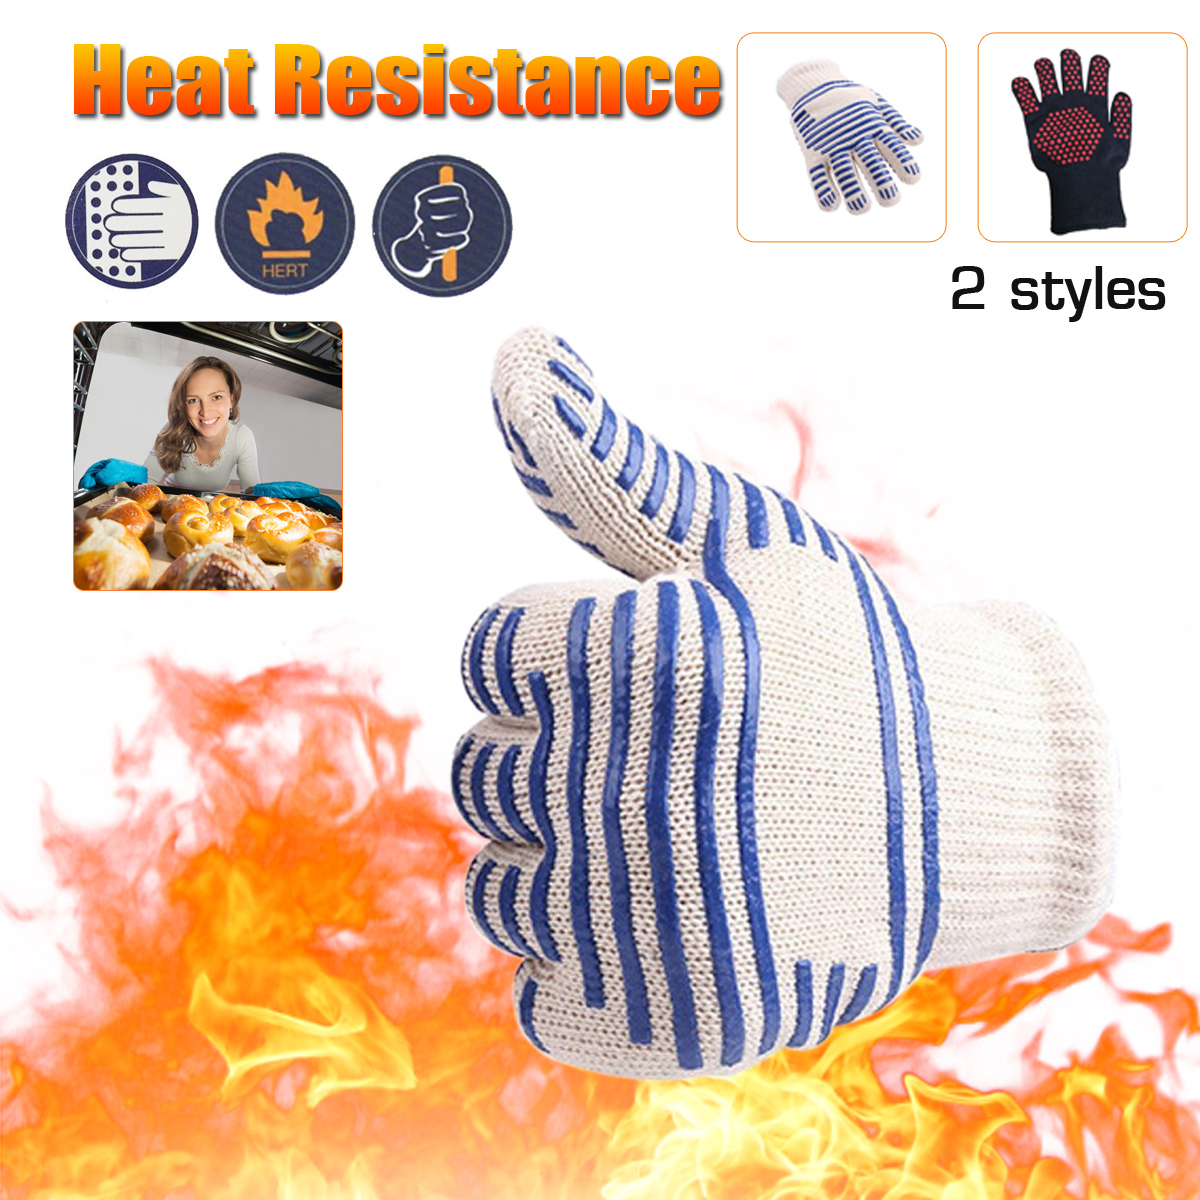 1PC-Extreme-Heat-Resistant-Kitchen-Oven-Mitts-Multi-Purpose-Barbecue-BBQ-Gloves-Anti-Cutting-Cooking-1651519-3